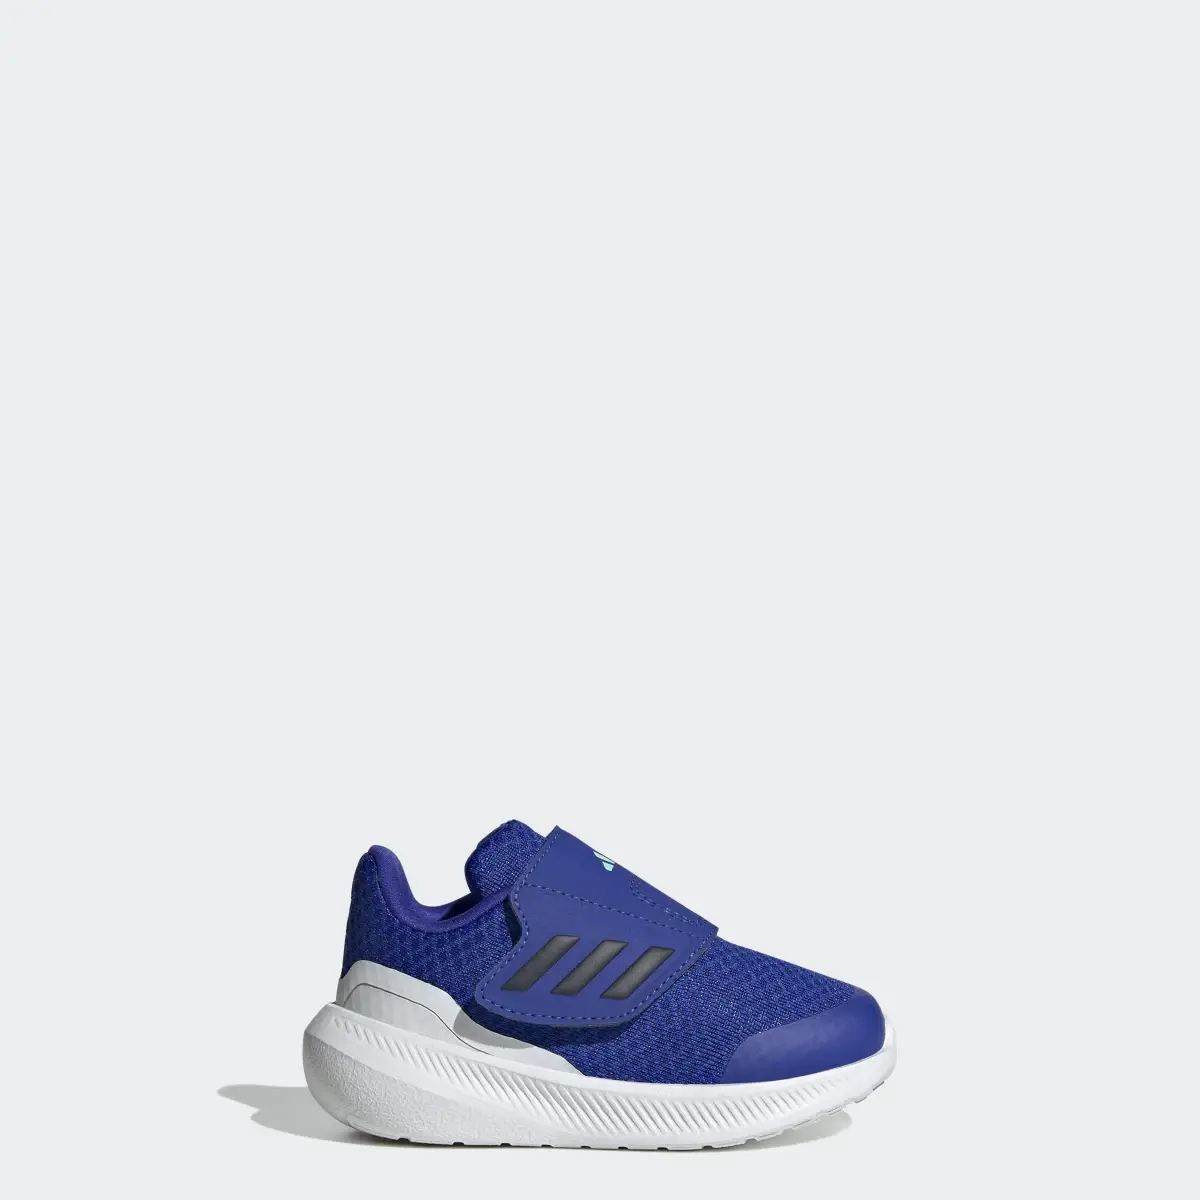 Adidas Runfalcon 3.0 Sport Running Hook-and-Loop Shoes. 1